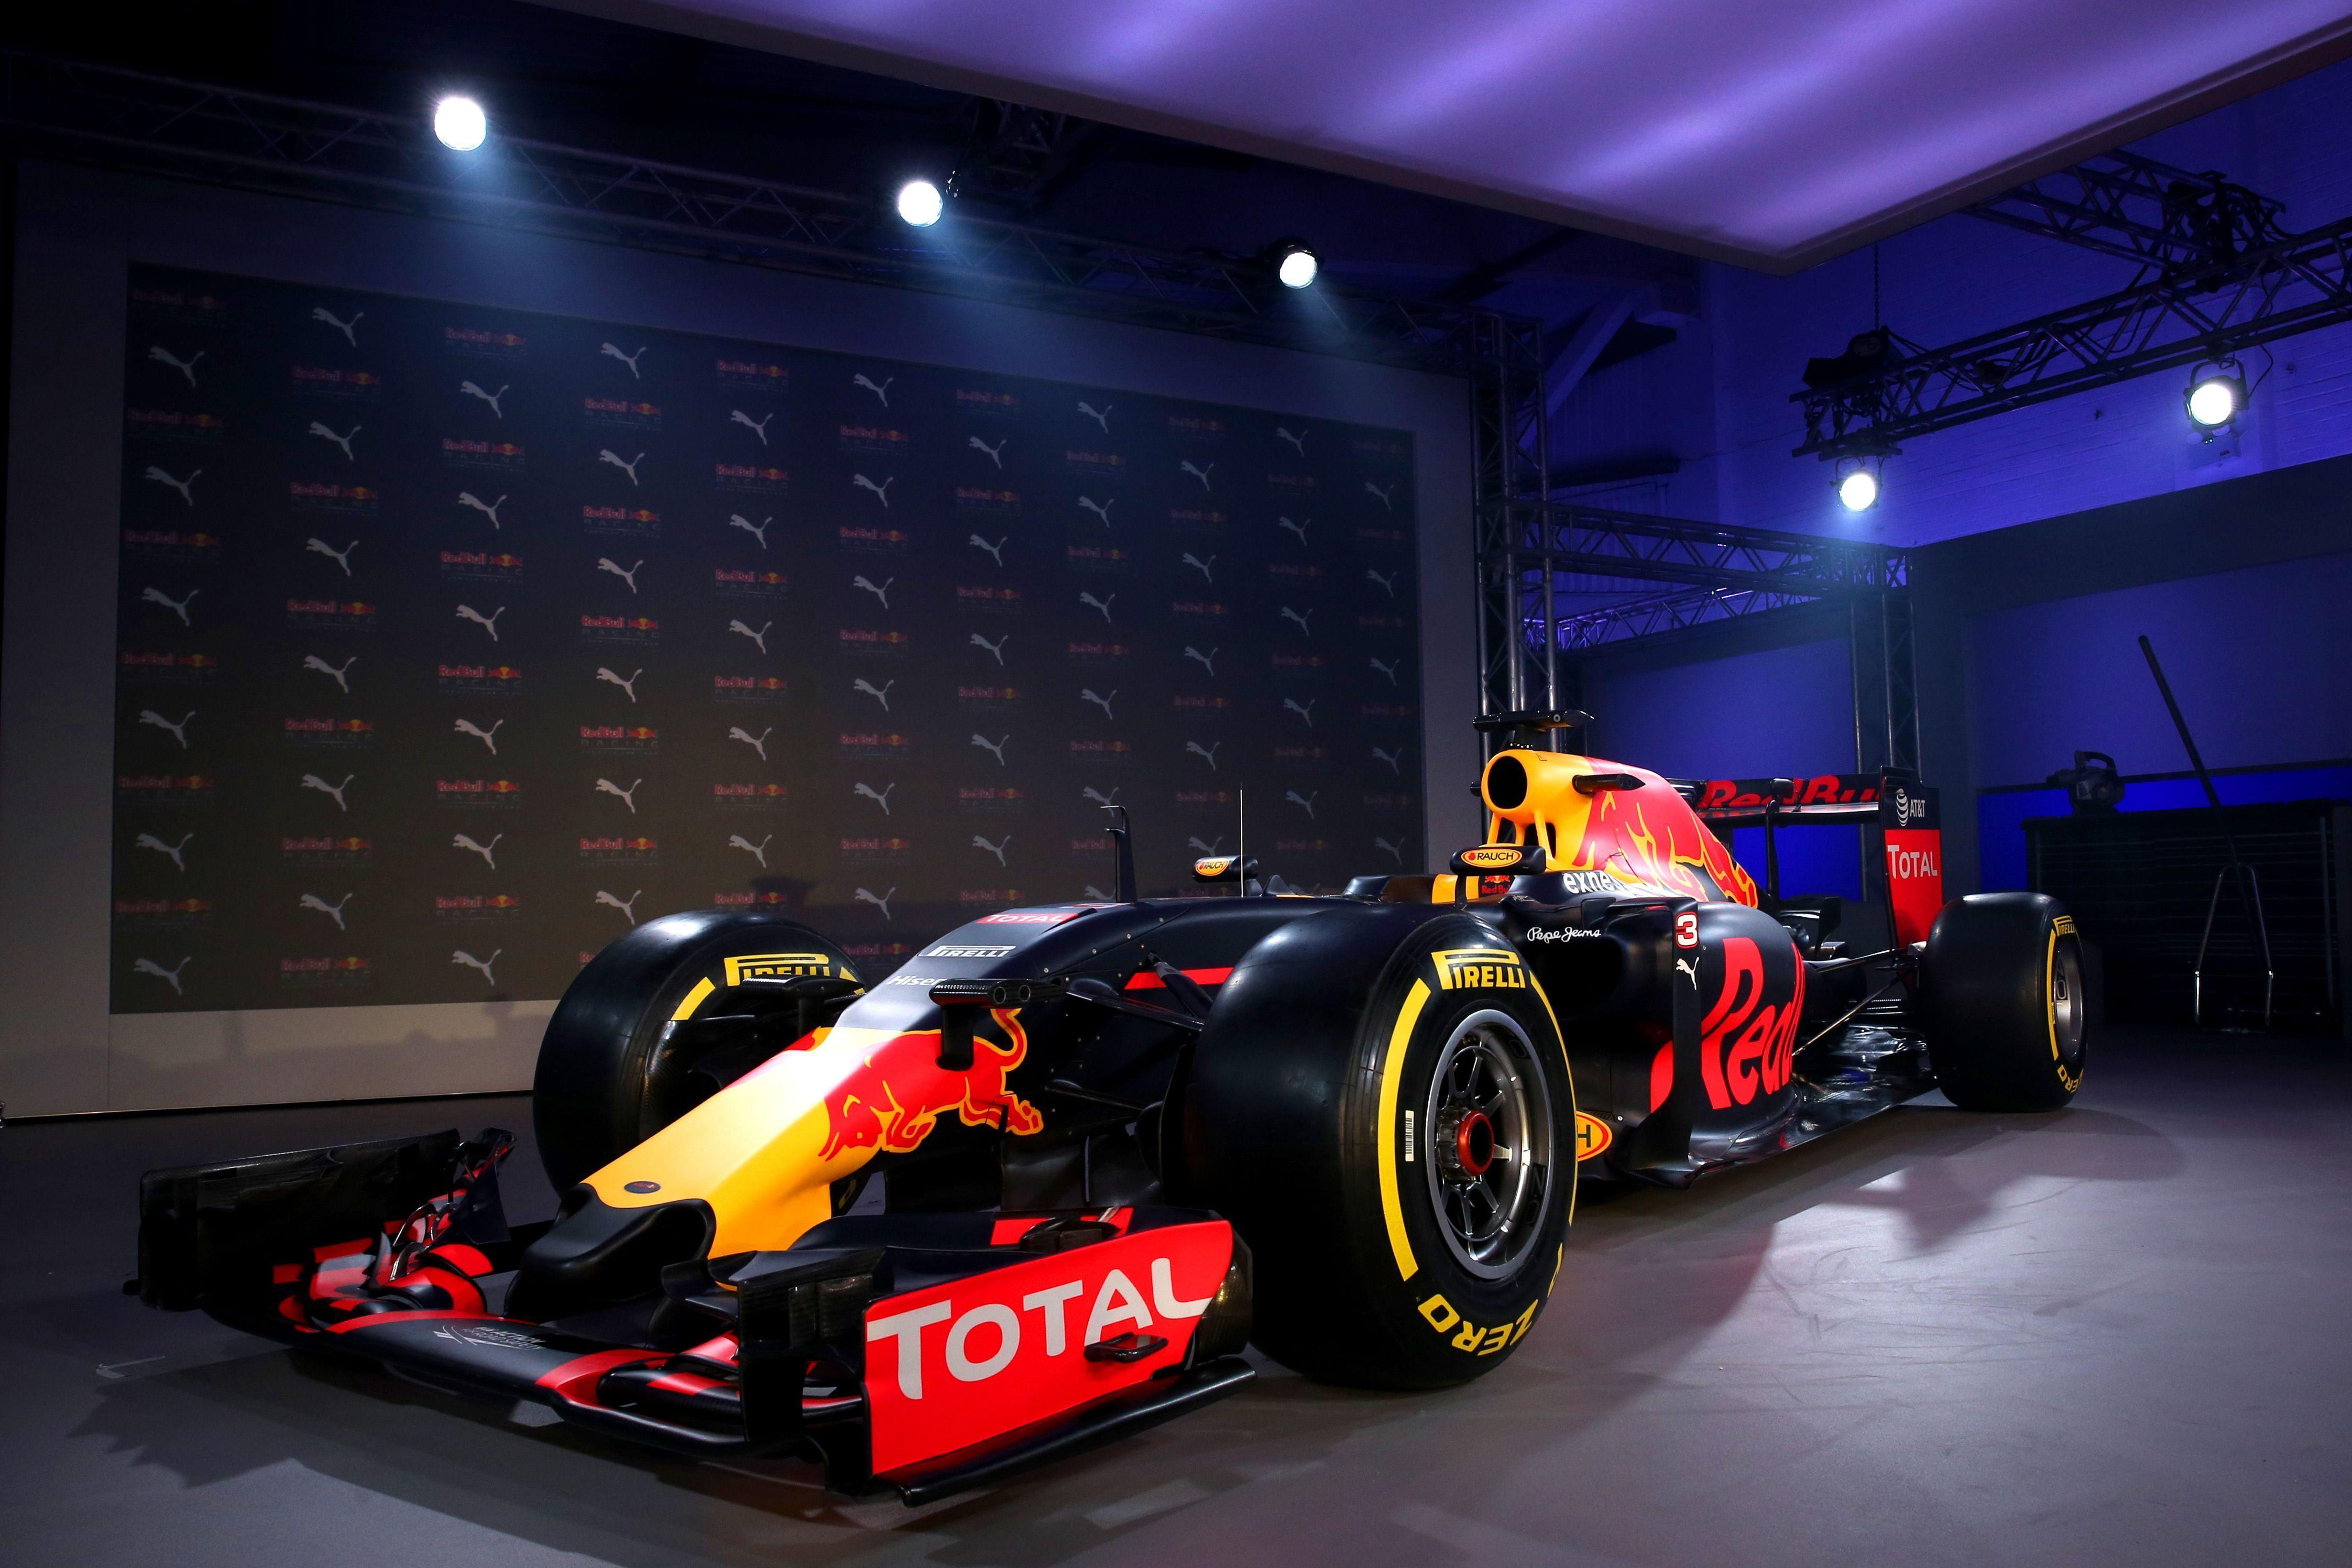 Red Bull RB12 F1 car launch picture